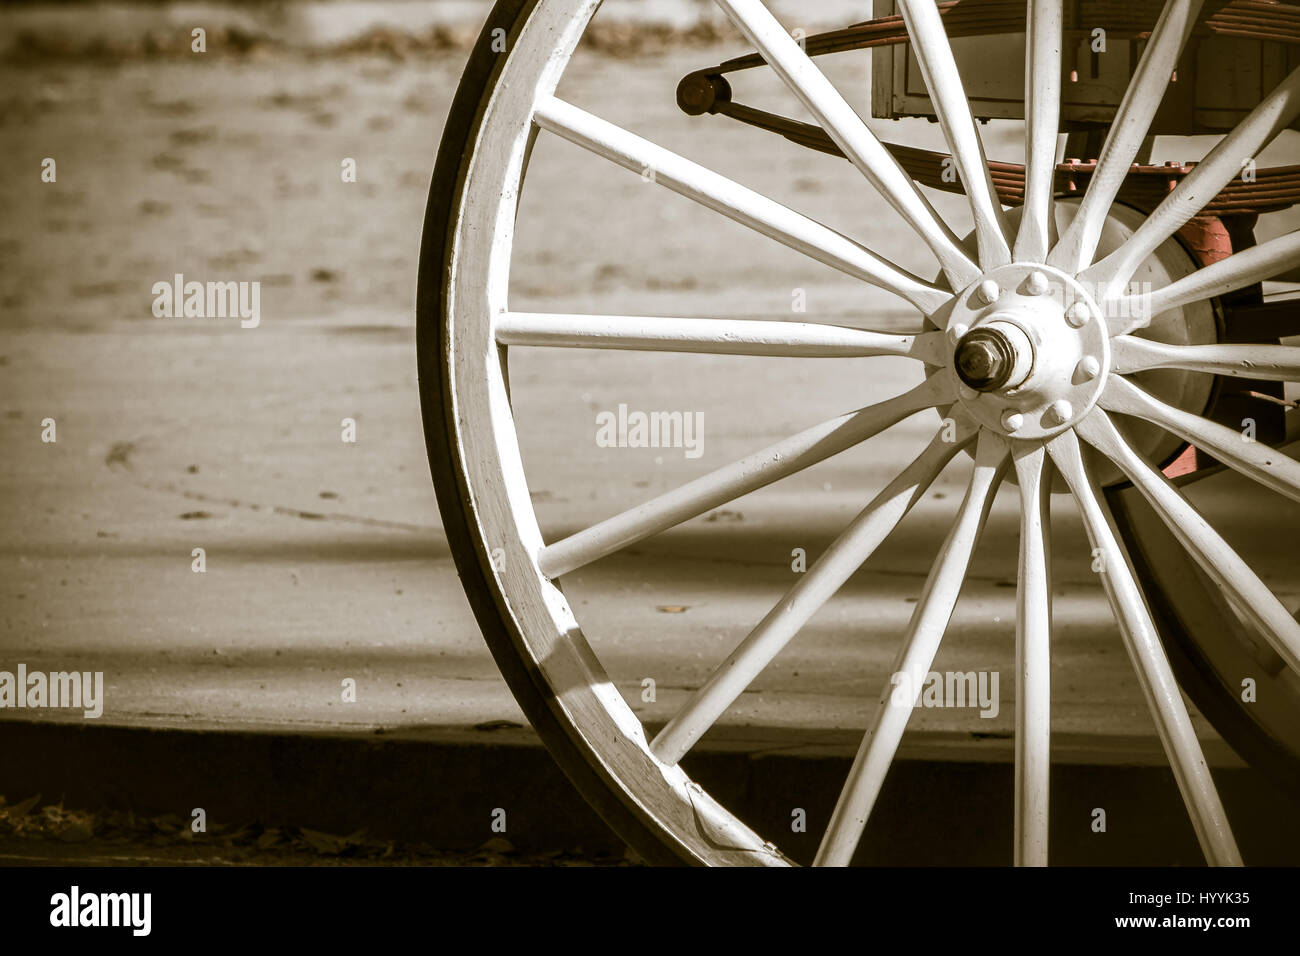 Wooden wheel of a horse drawn carriage. Stock Photo